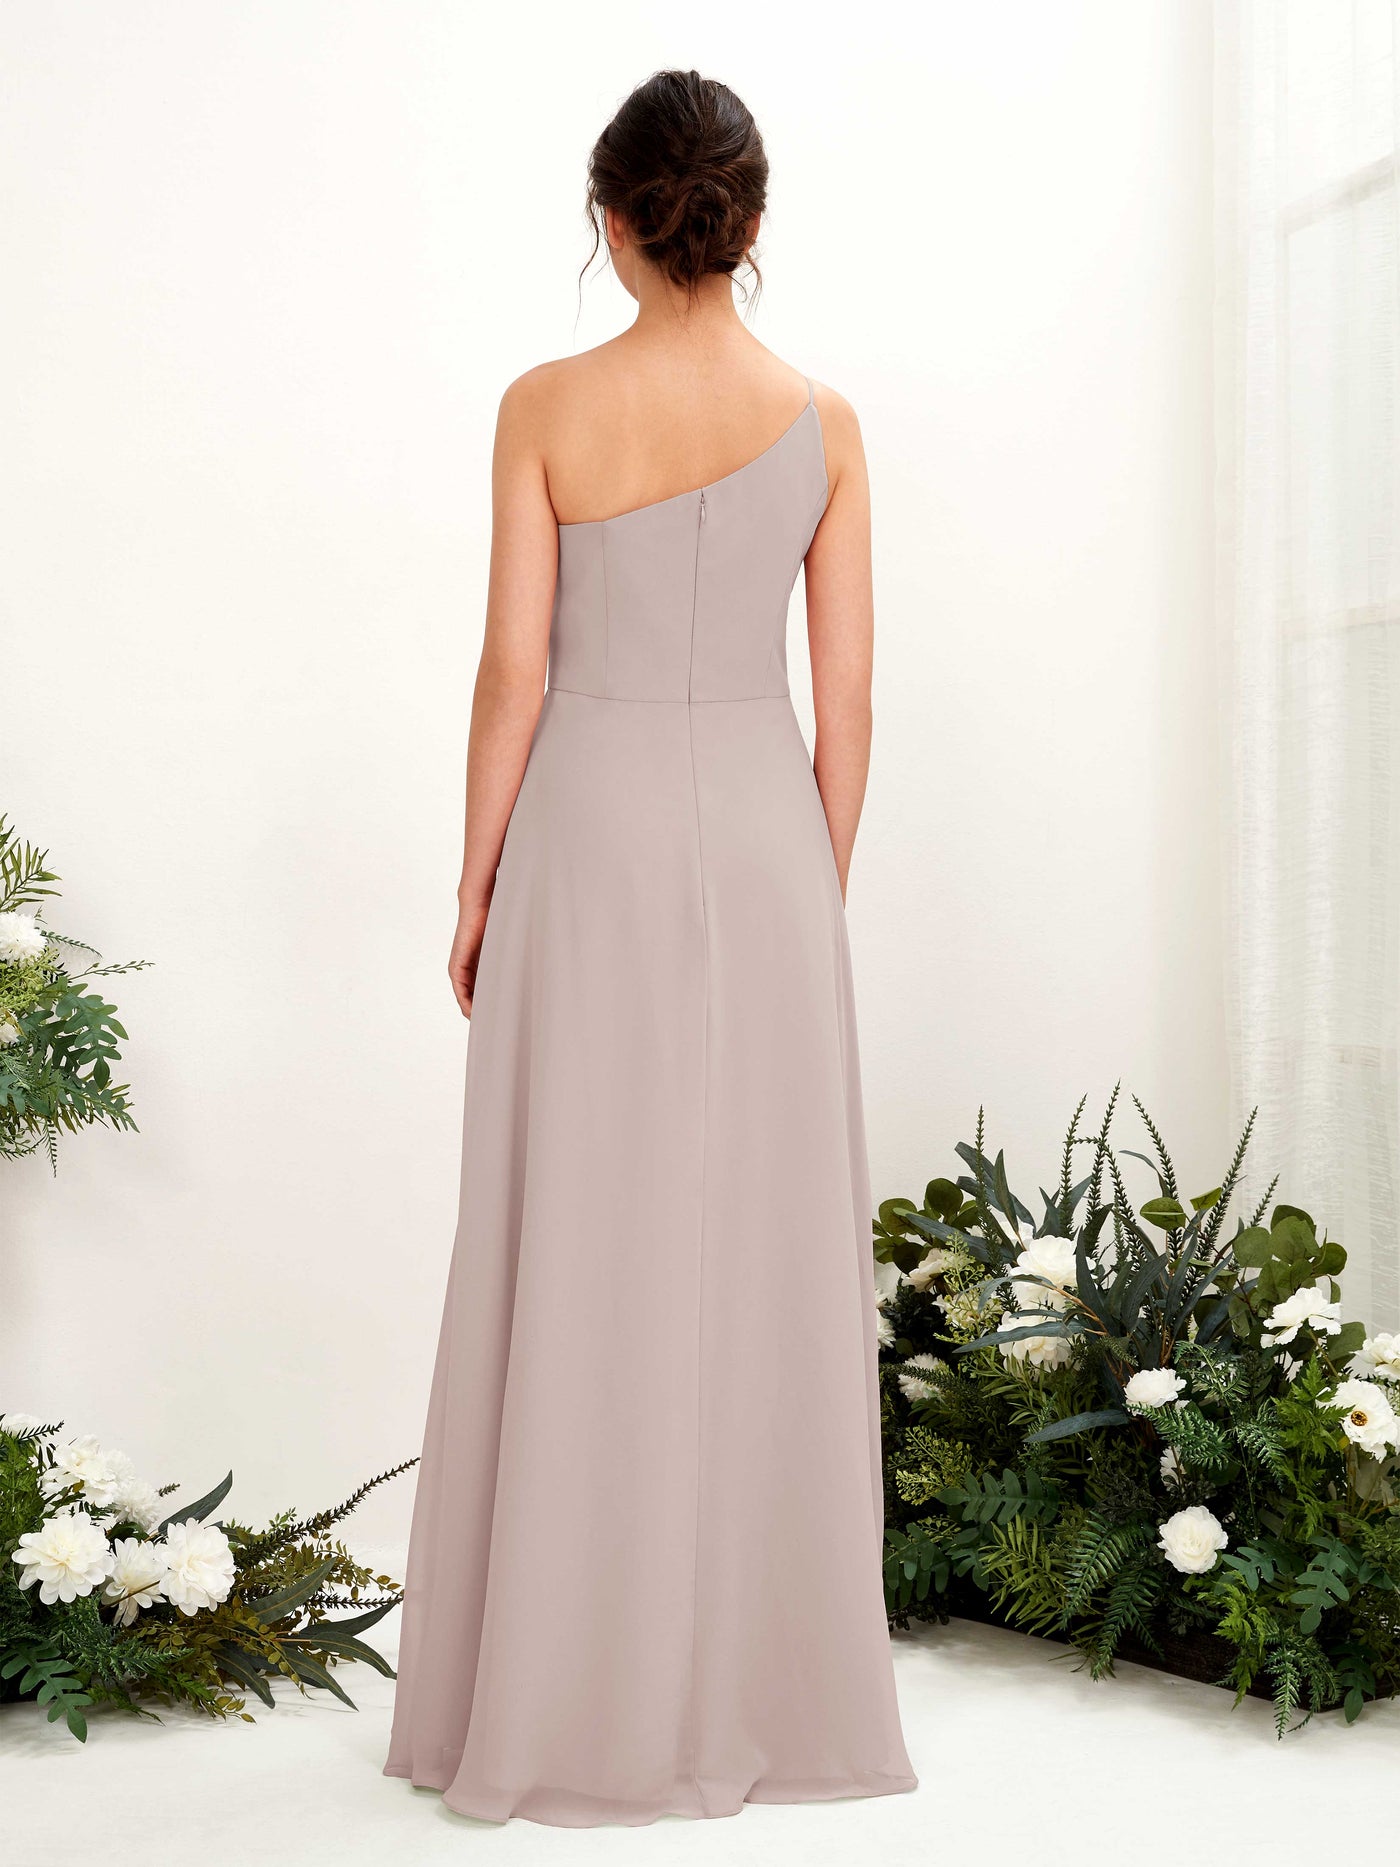 Taupe Bridesmaid Dresses Bridesmaid Dress A-line Chiffon One Shoulder Full Length Sleeveless Wedding Party Dress (81225724)#color_taupe